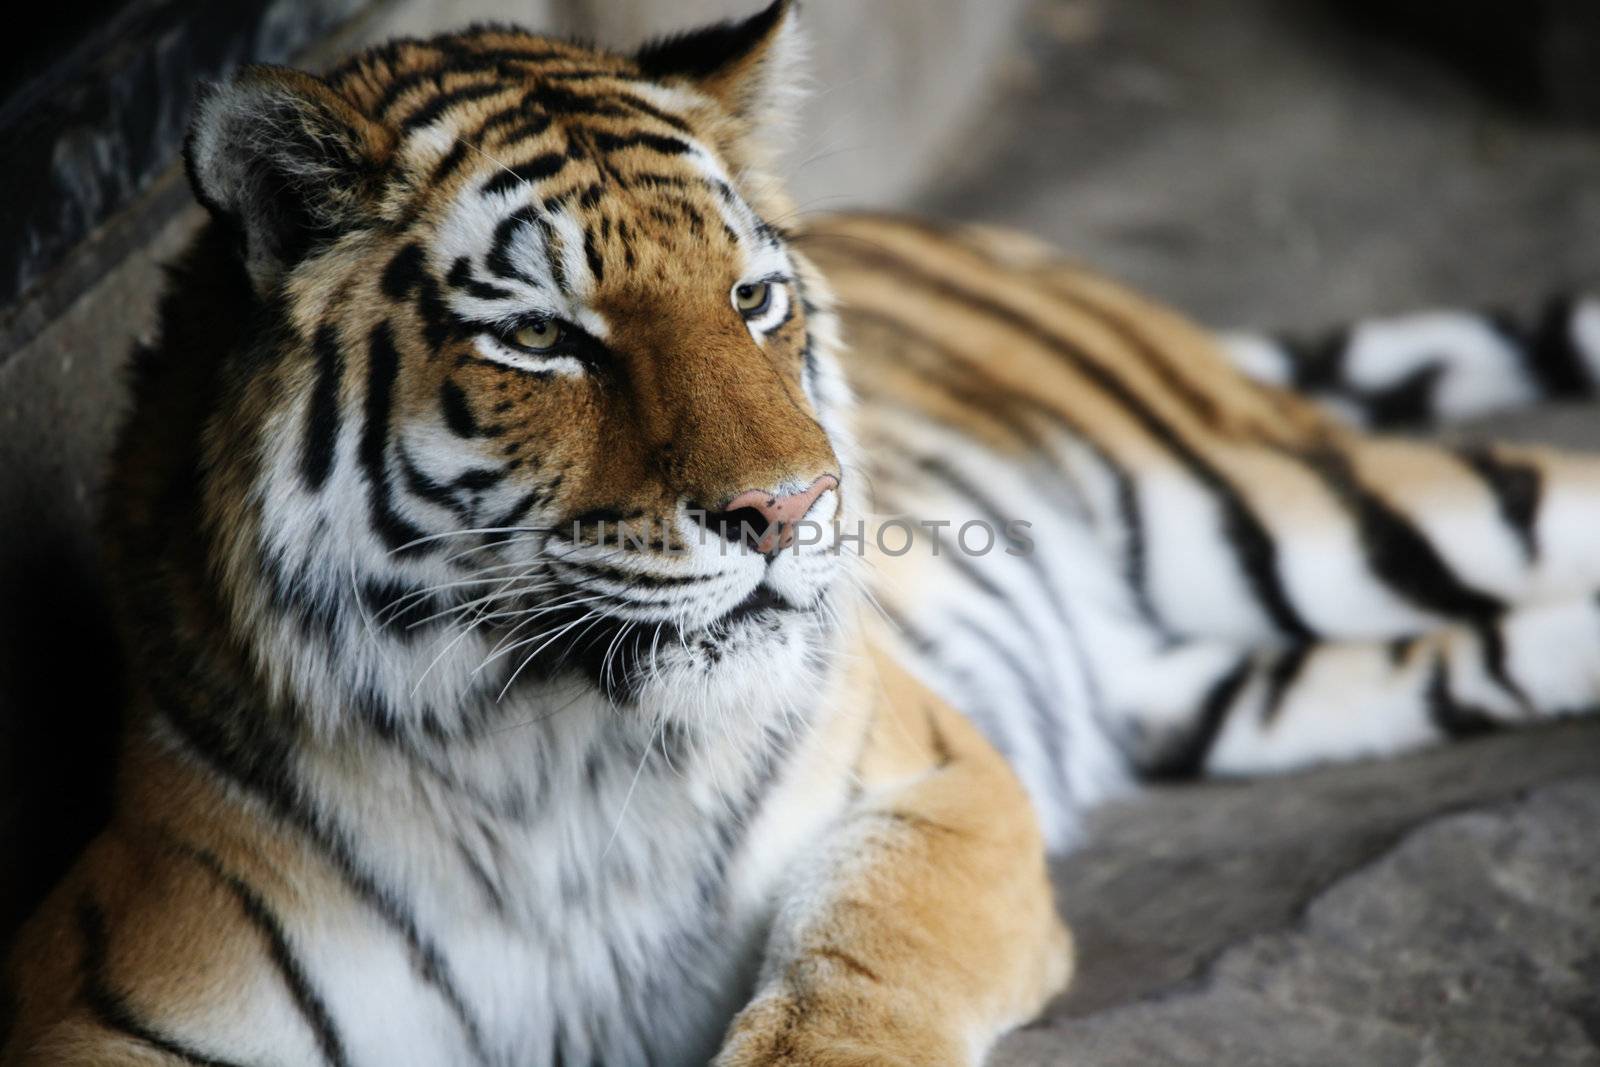 Handsome tiger resting  in cool corner of habitat, with dark corners. Shallow DOF used, on face